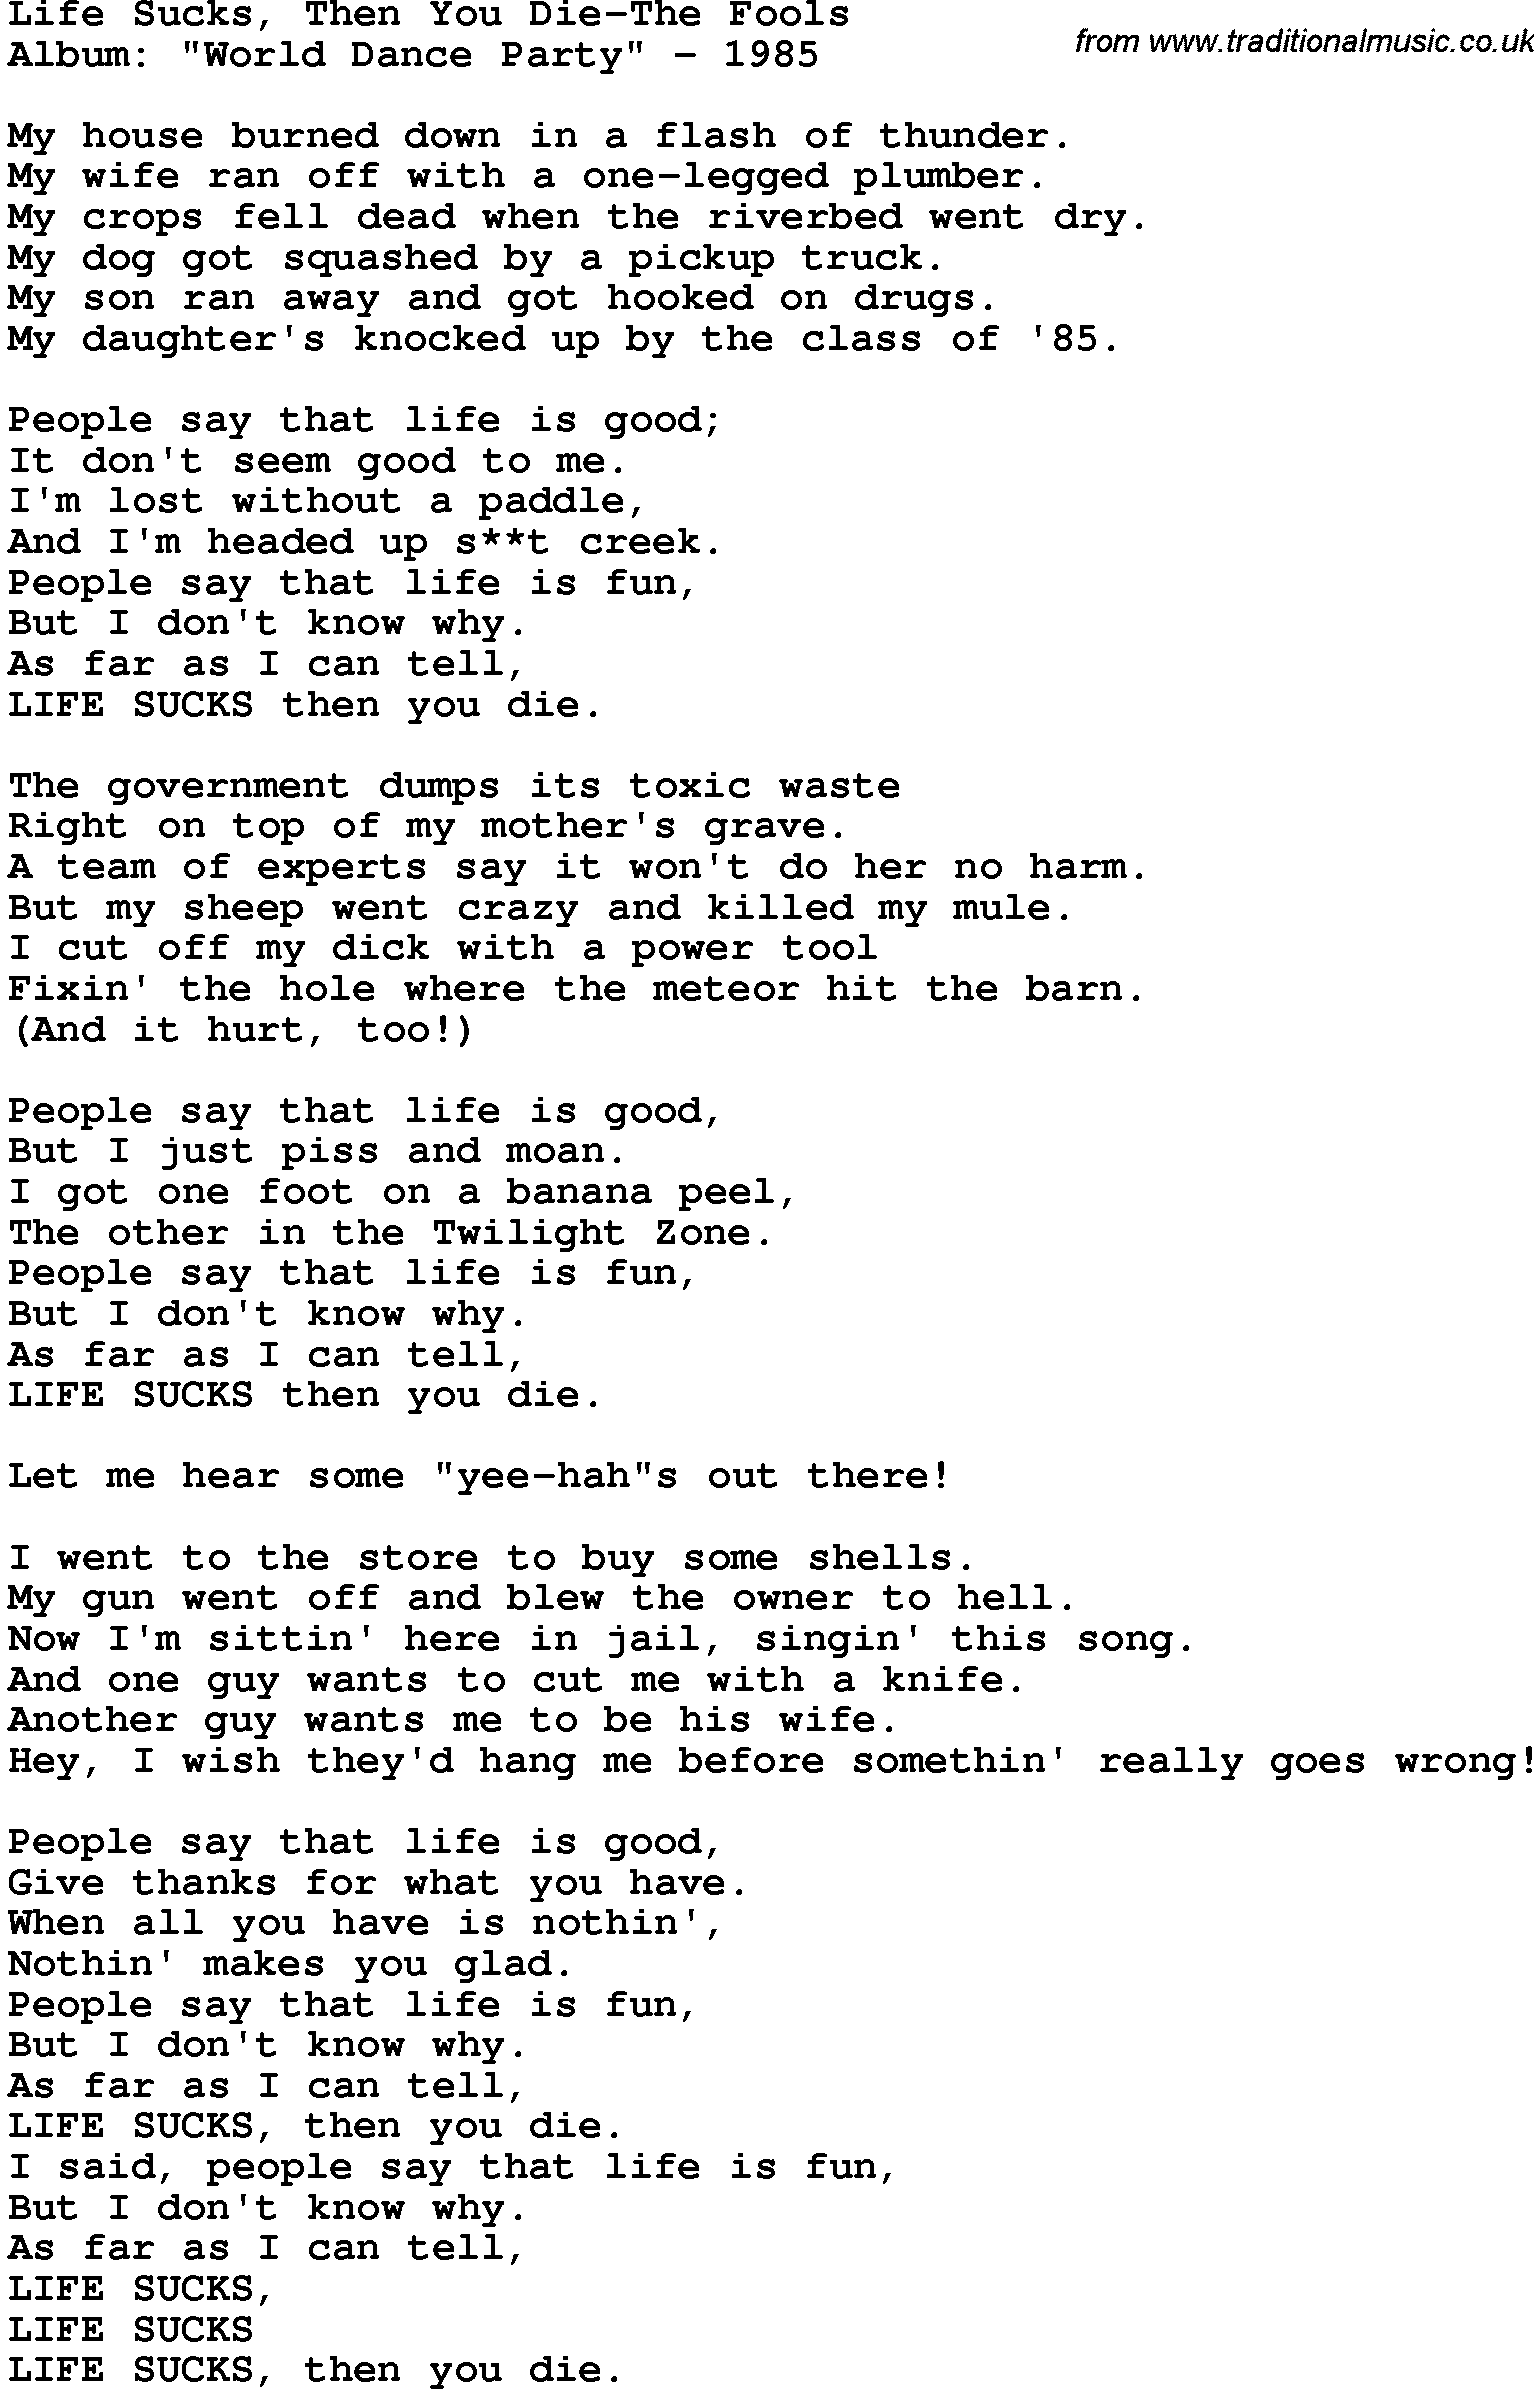 Novelty song: Life Sucks, Then You Die-The Fools lyrics